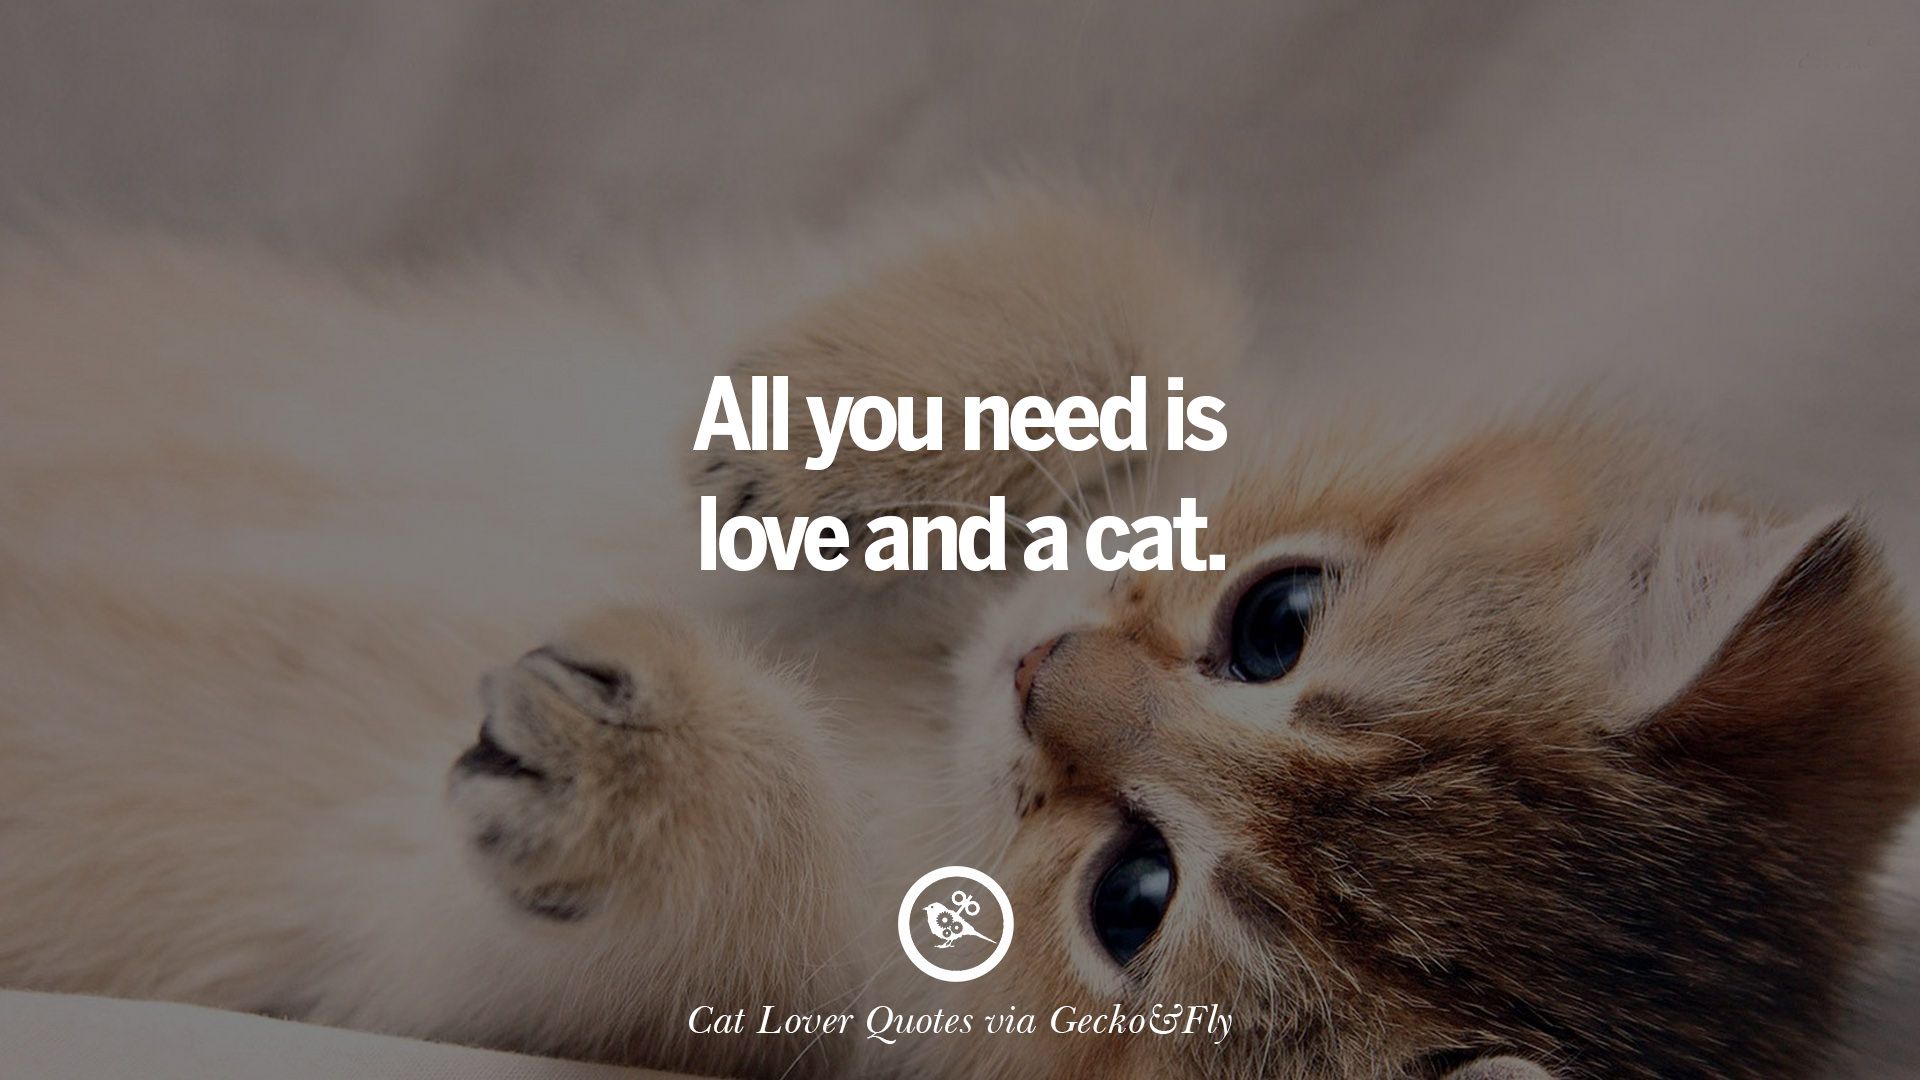 Cute Cat Image With Quotes For Crazy Cat Ladies, Gentlemen And Lovers